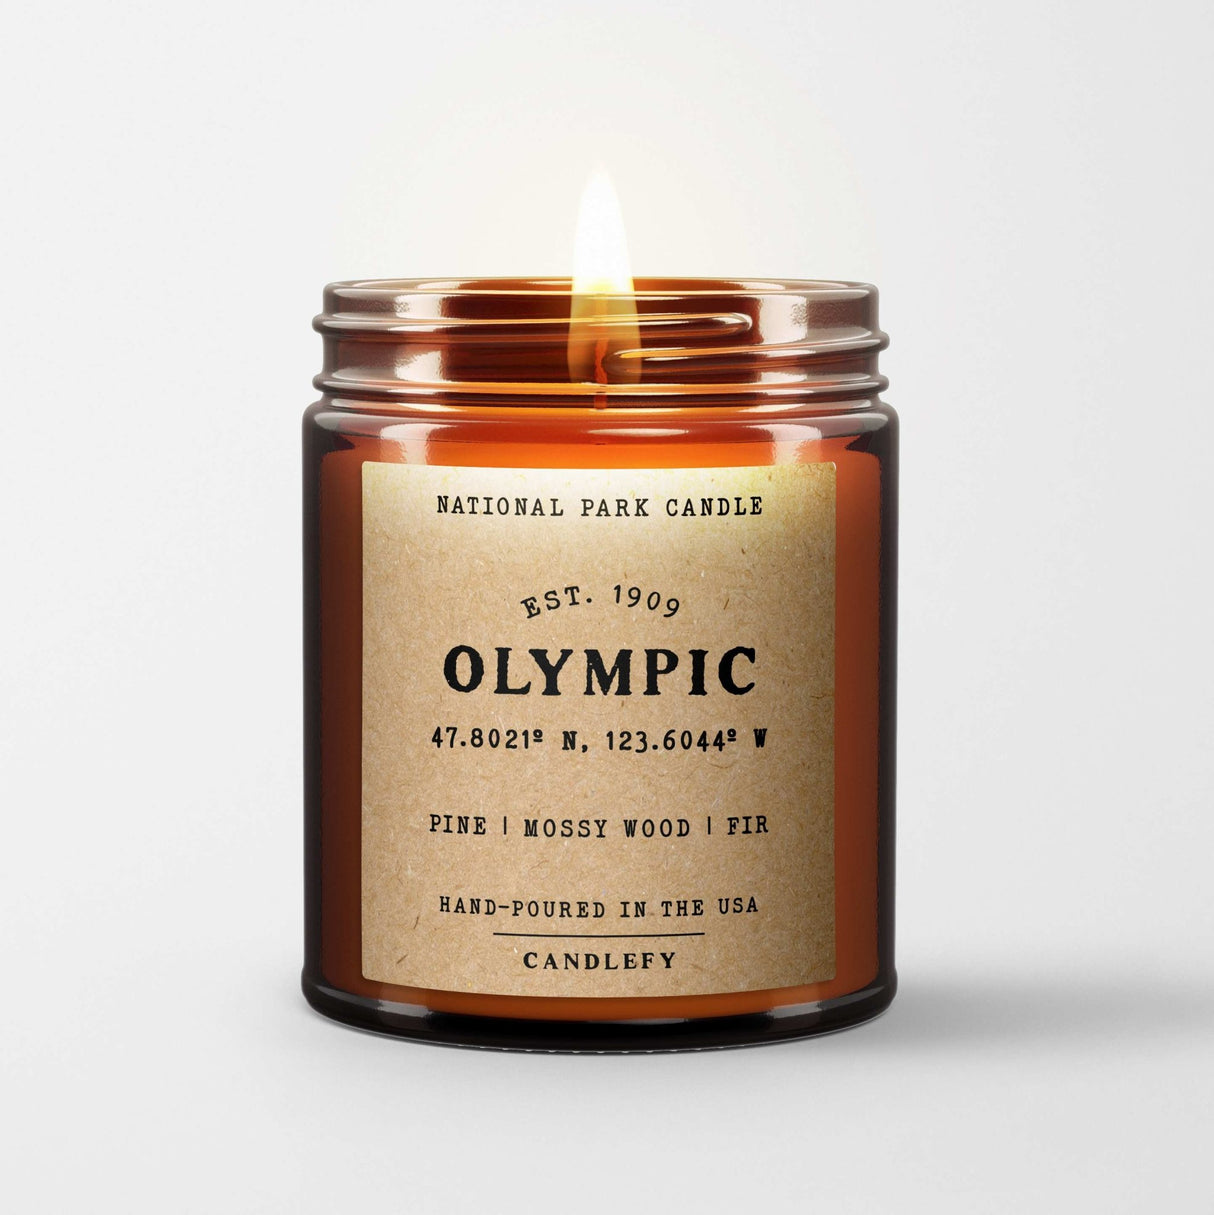 Olympic National Park Candle - Candlefy